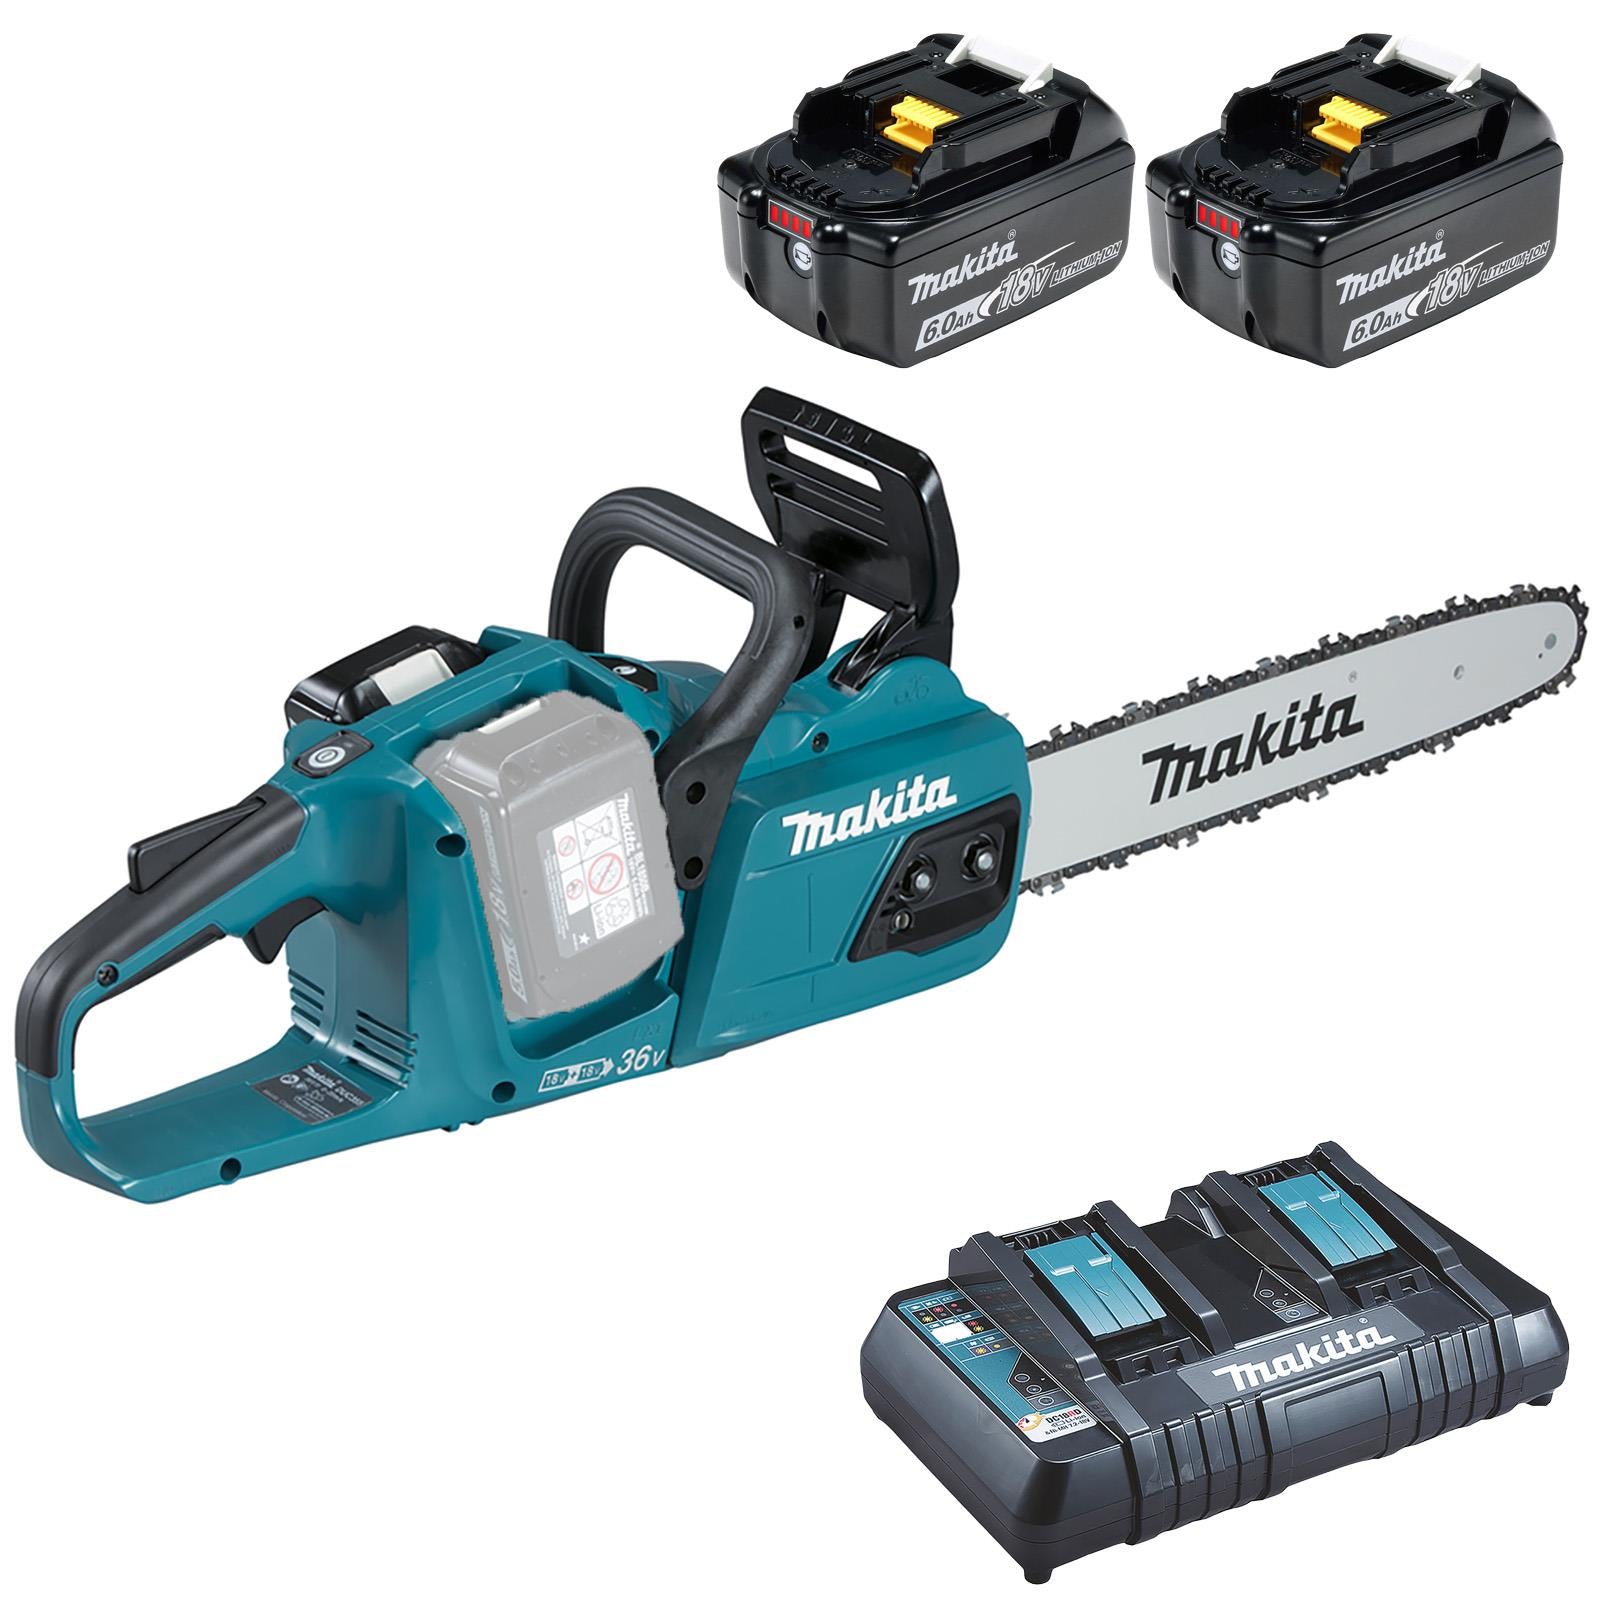 Makita Chainsaw Kit Heavy Duty 35cm 14" 18V x 2 LXT Brushless Cordless 2 x 6Ah Battery and Dual Rapid Charger Garden Tree Cutting Pruning DUC355PG2